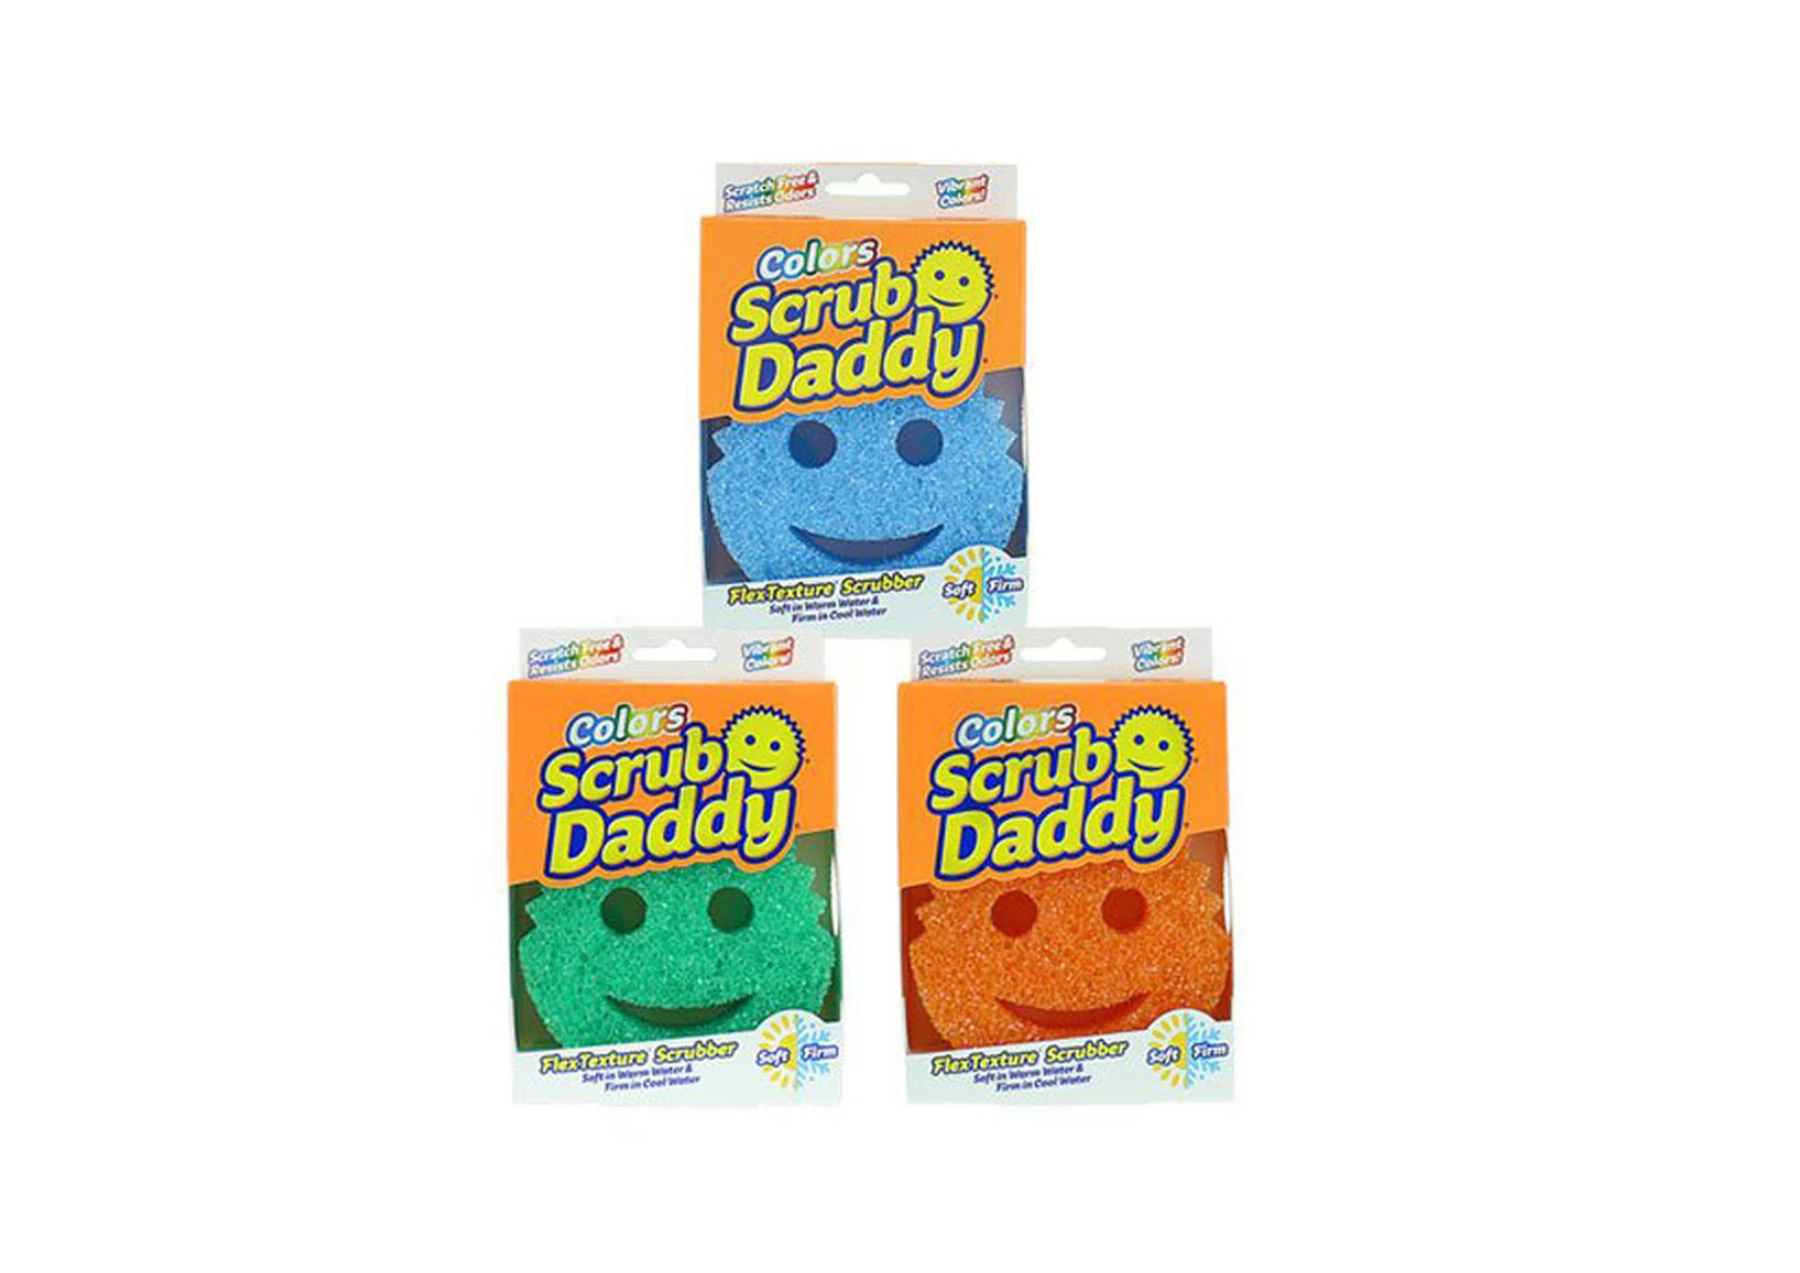 Dropship Scrub Daddy Sponge Halloween Edition Sponges, 3 Count to Sell  Online at a Lower Price